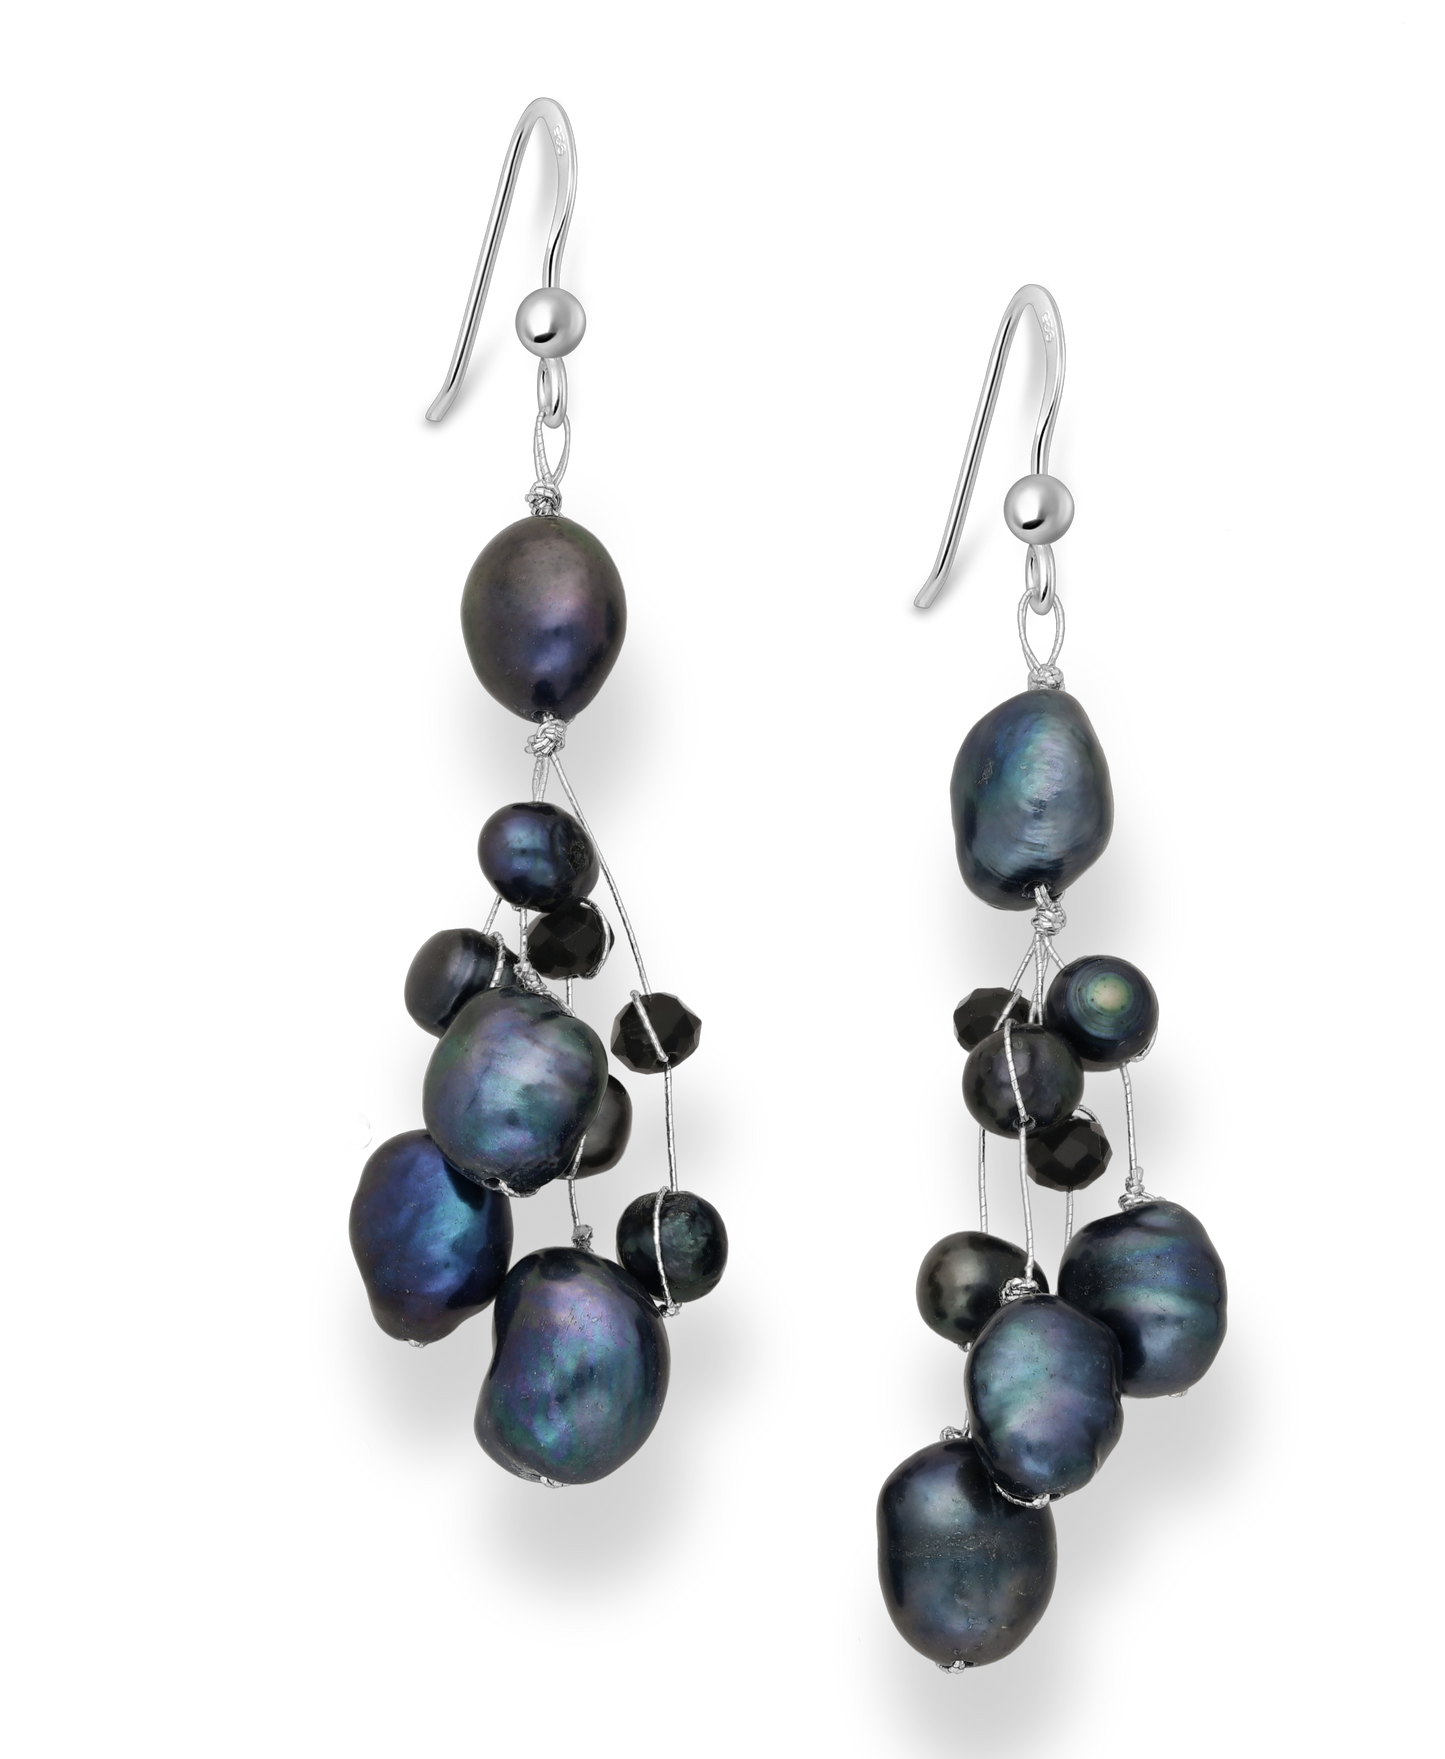 Hook Earrings Beaded with Black Fresh Water Pearls and Crystal Glass on Sterling Silver